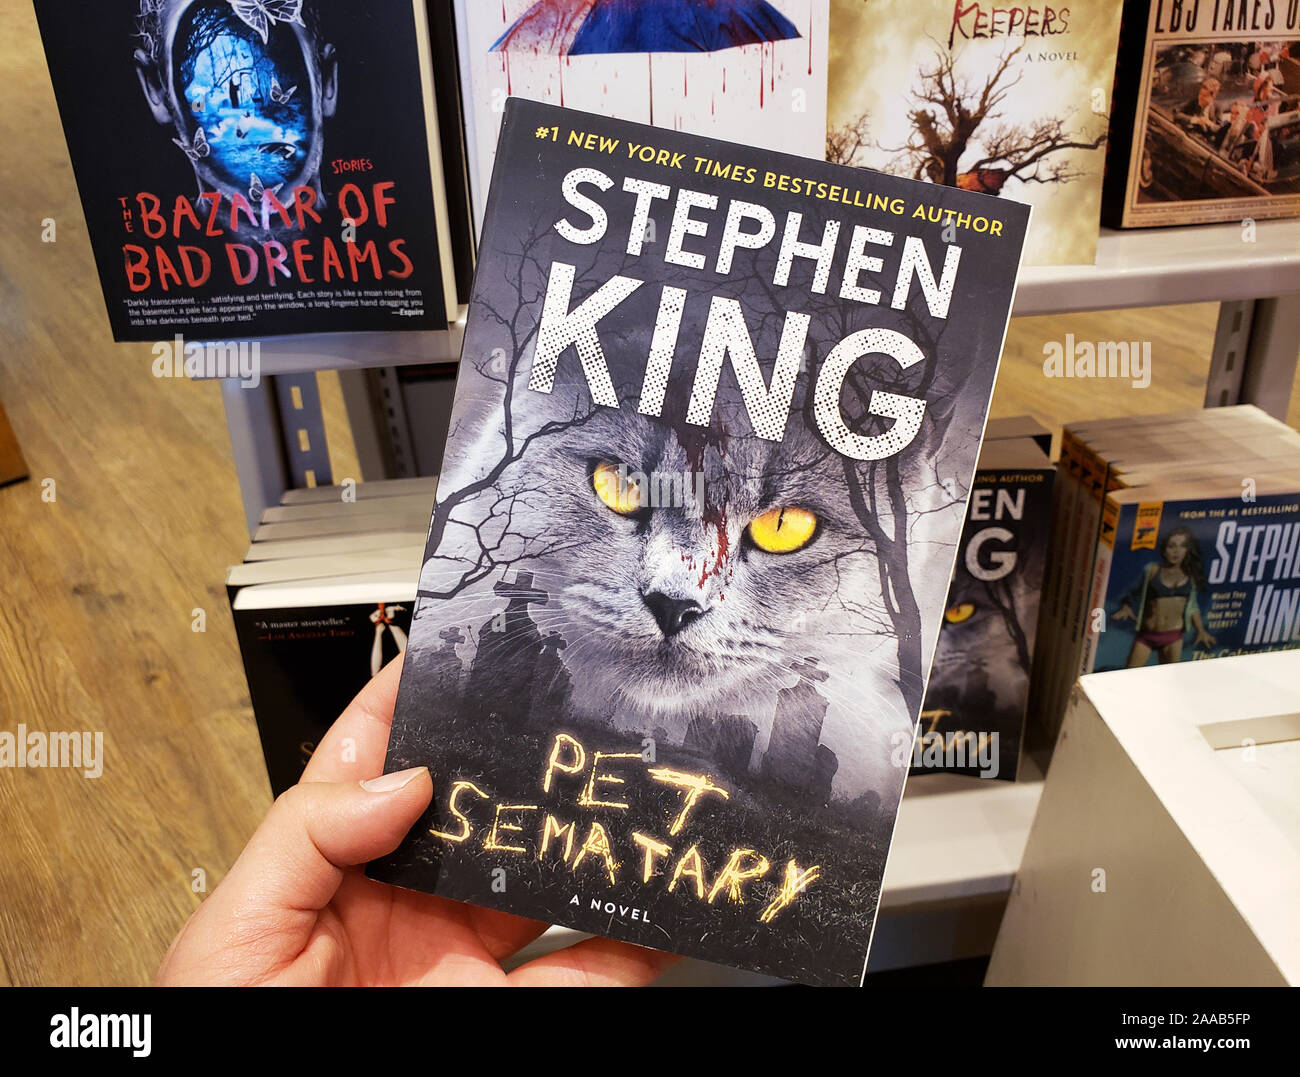 Montreal, Canada - October 23, 2019: A hand holding a Stephen King book Pet Sematary. Stephen King is an American famous author of supernatural fictio Stock Photo